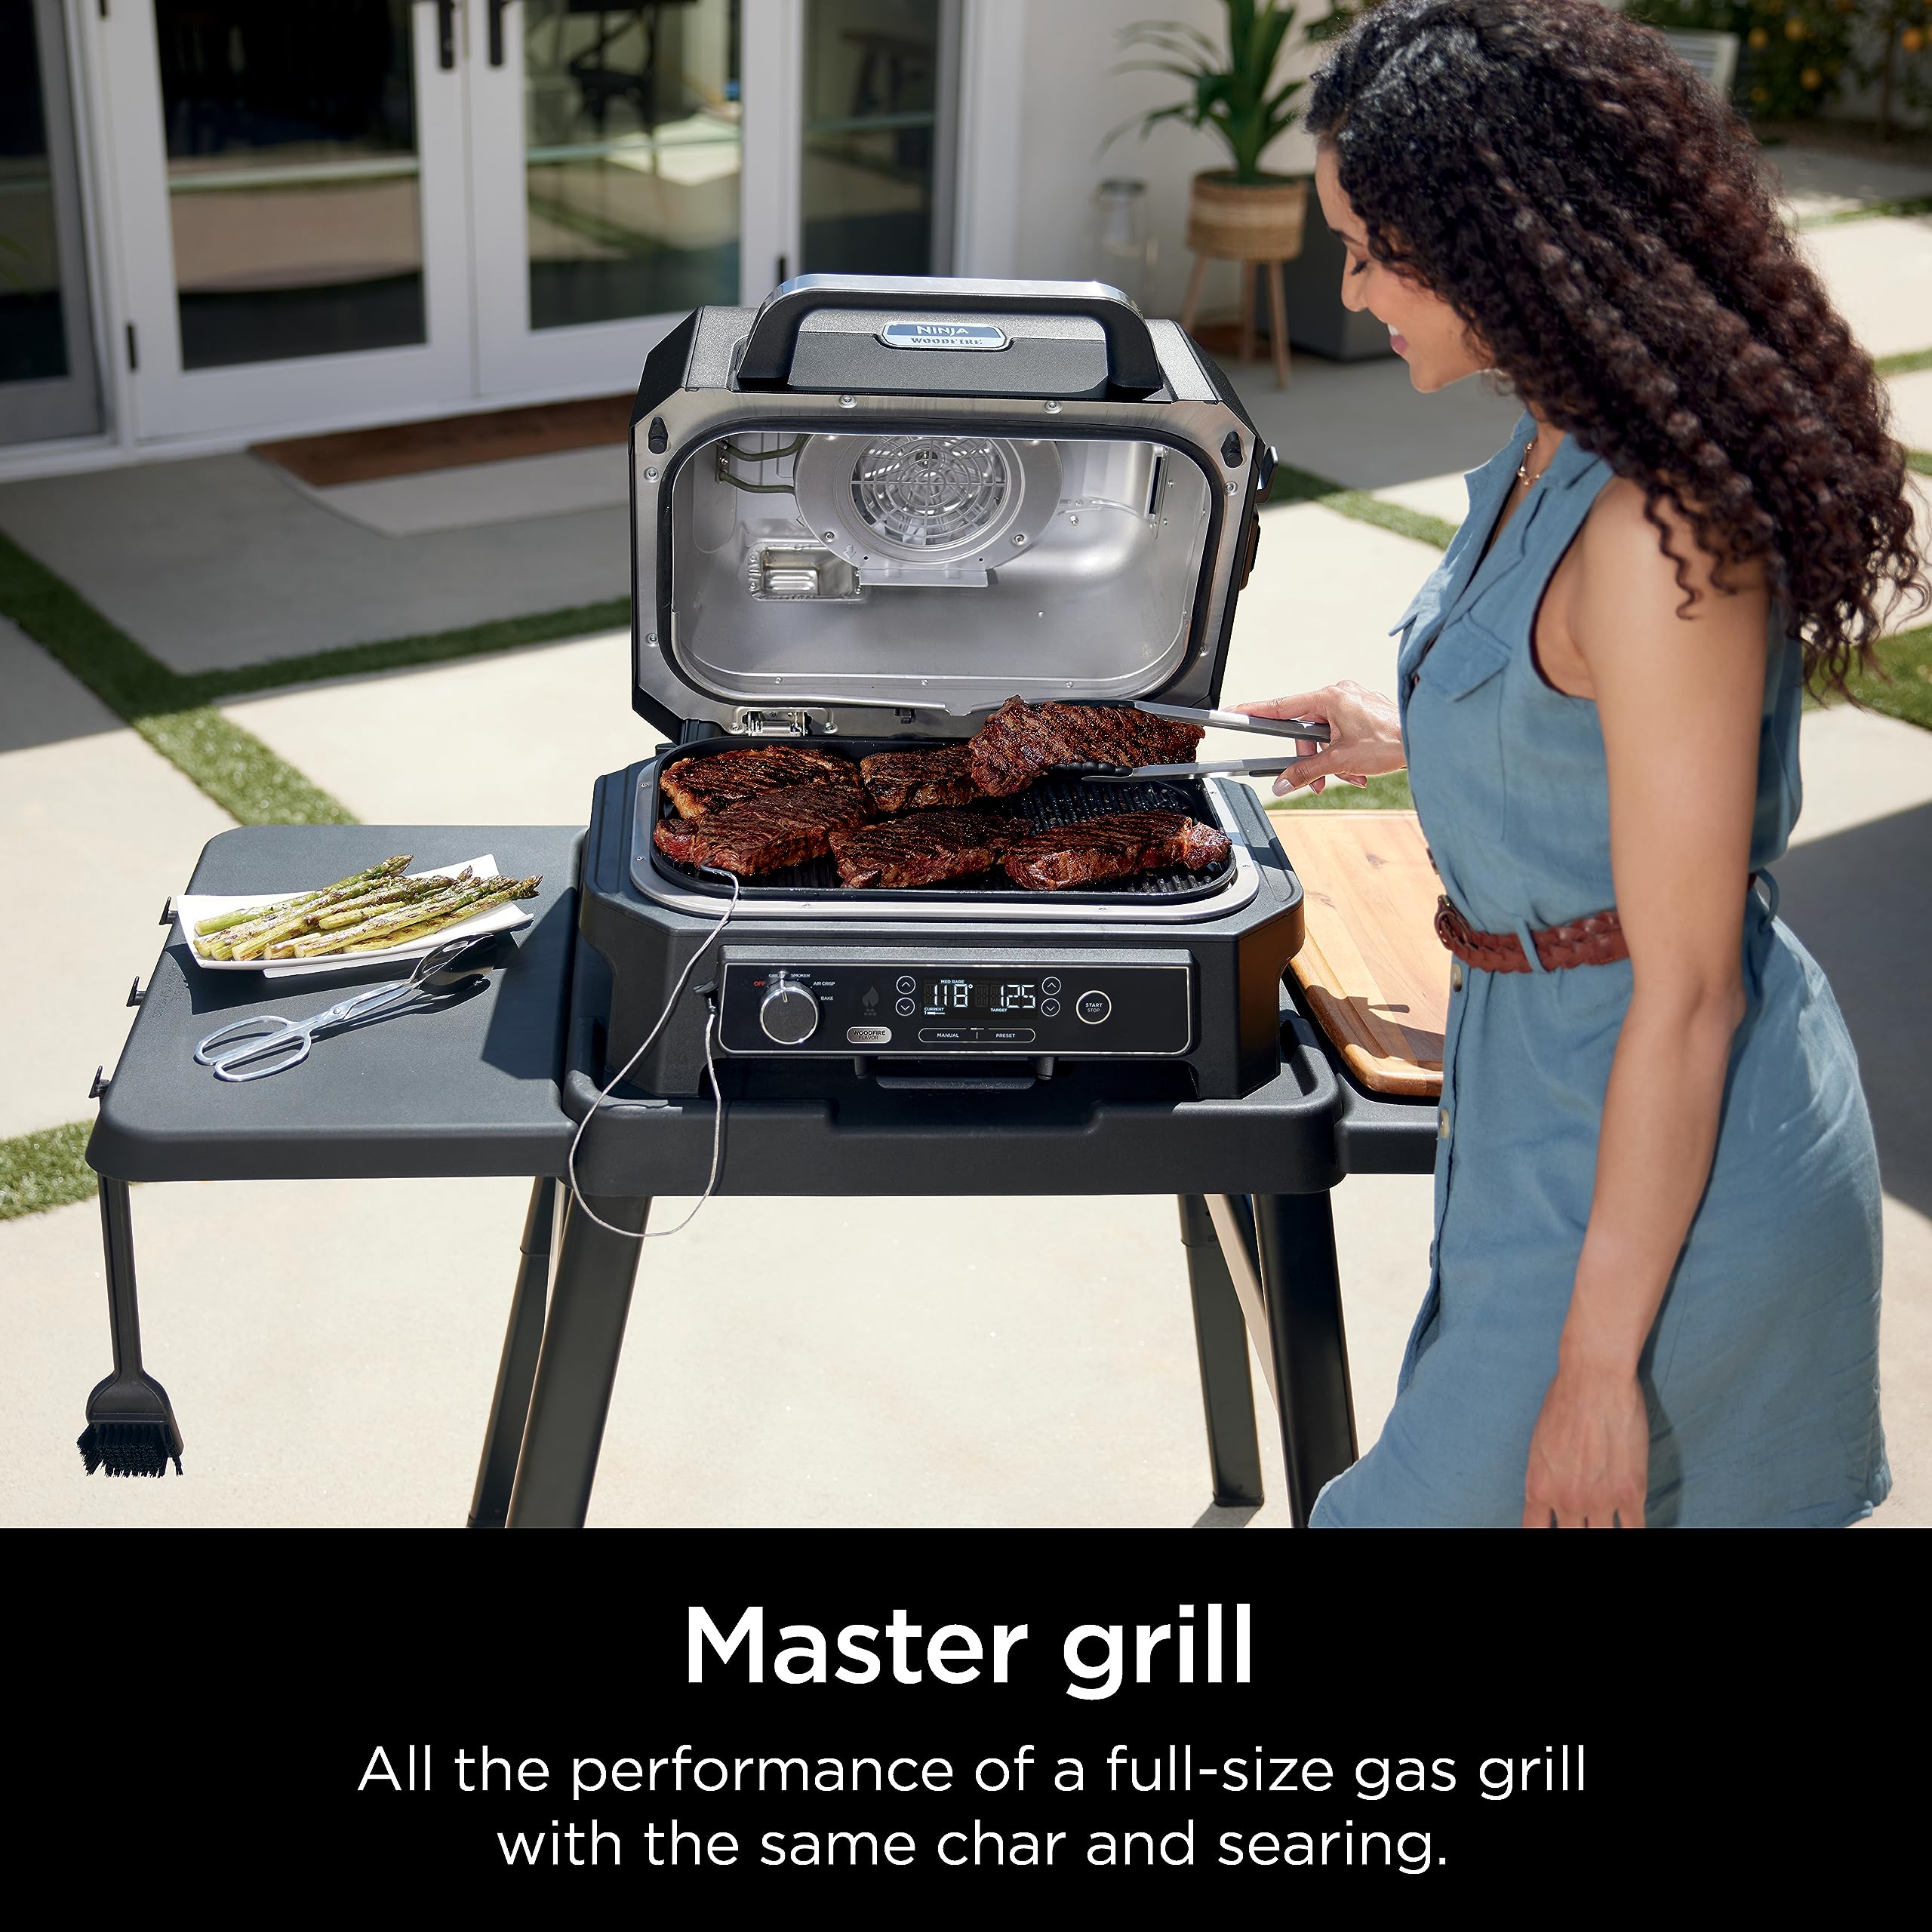 Ninja OG850 Woodfire Pro XL Outdoor Grill & Smoker with Built-In Thermometer, 4-in-1 Master Grill, BBQ Smoker, Outdoor Air Fryer, Bake, Portable, Electric, Blue